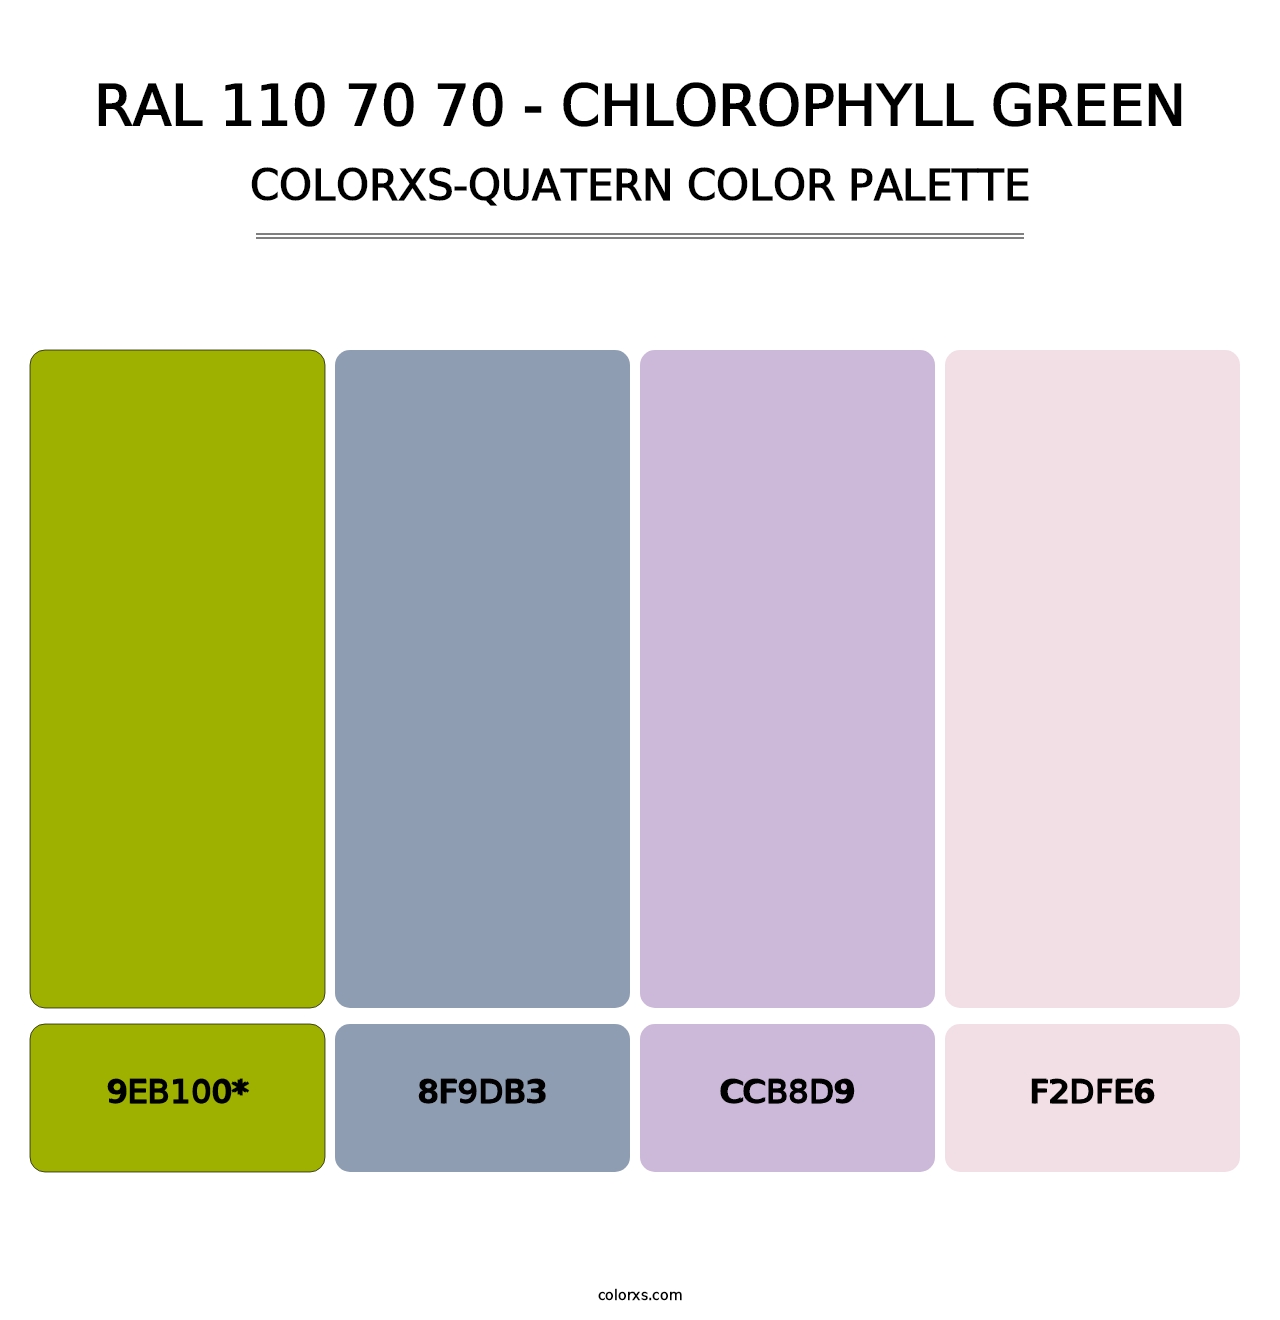 RAL 110 70 70 - Chlorophyll Green - Colorxs Quatern Palette